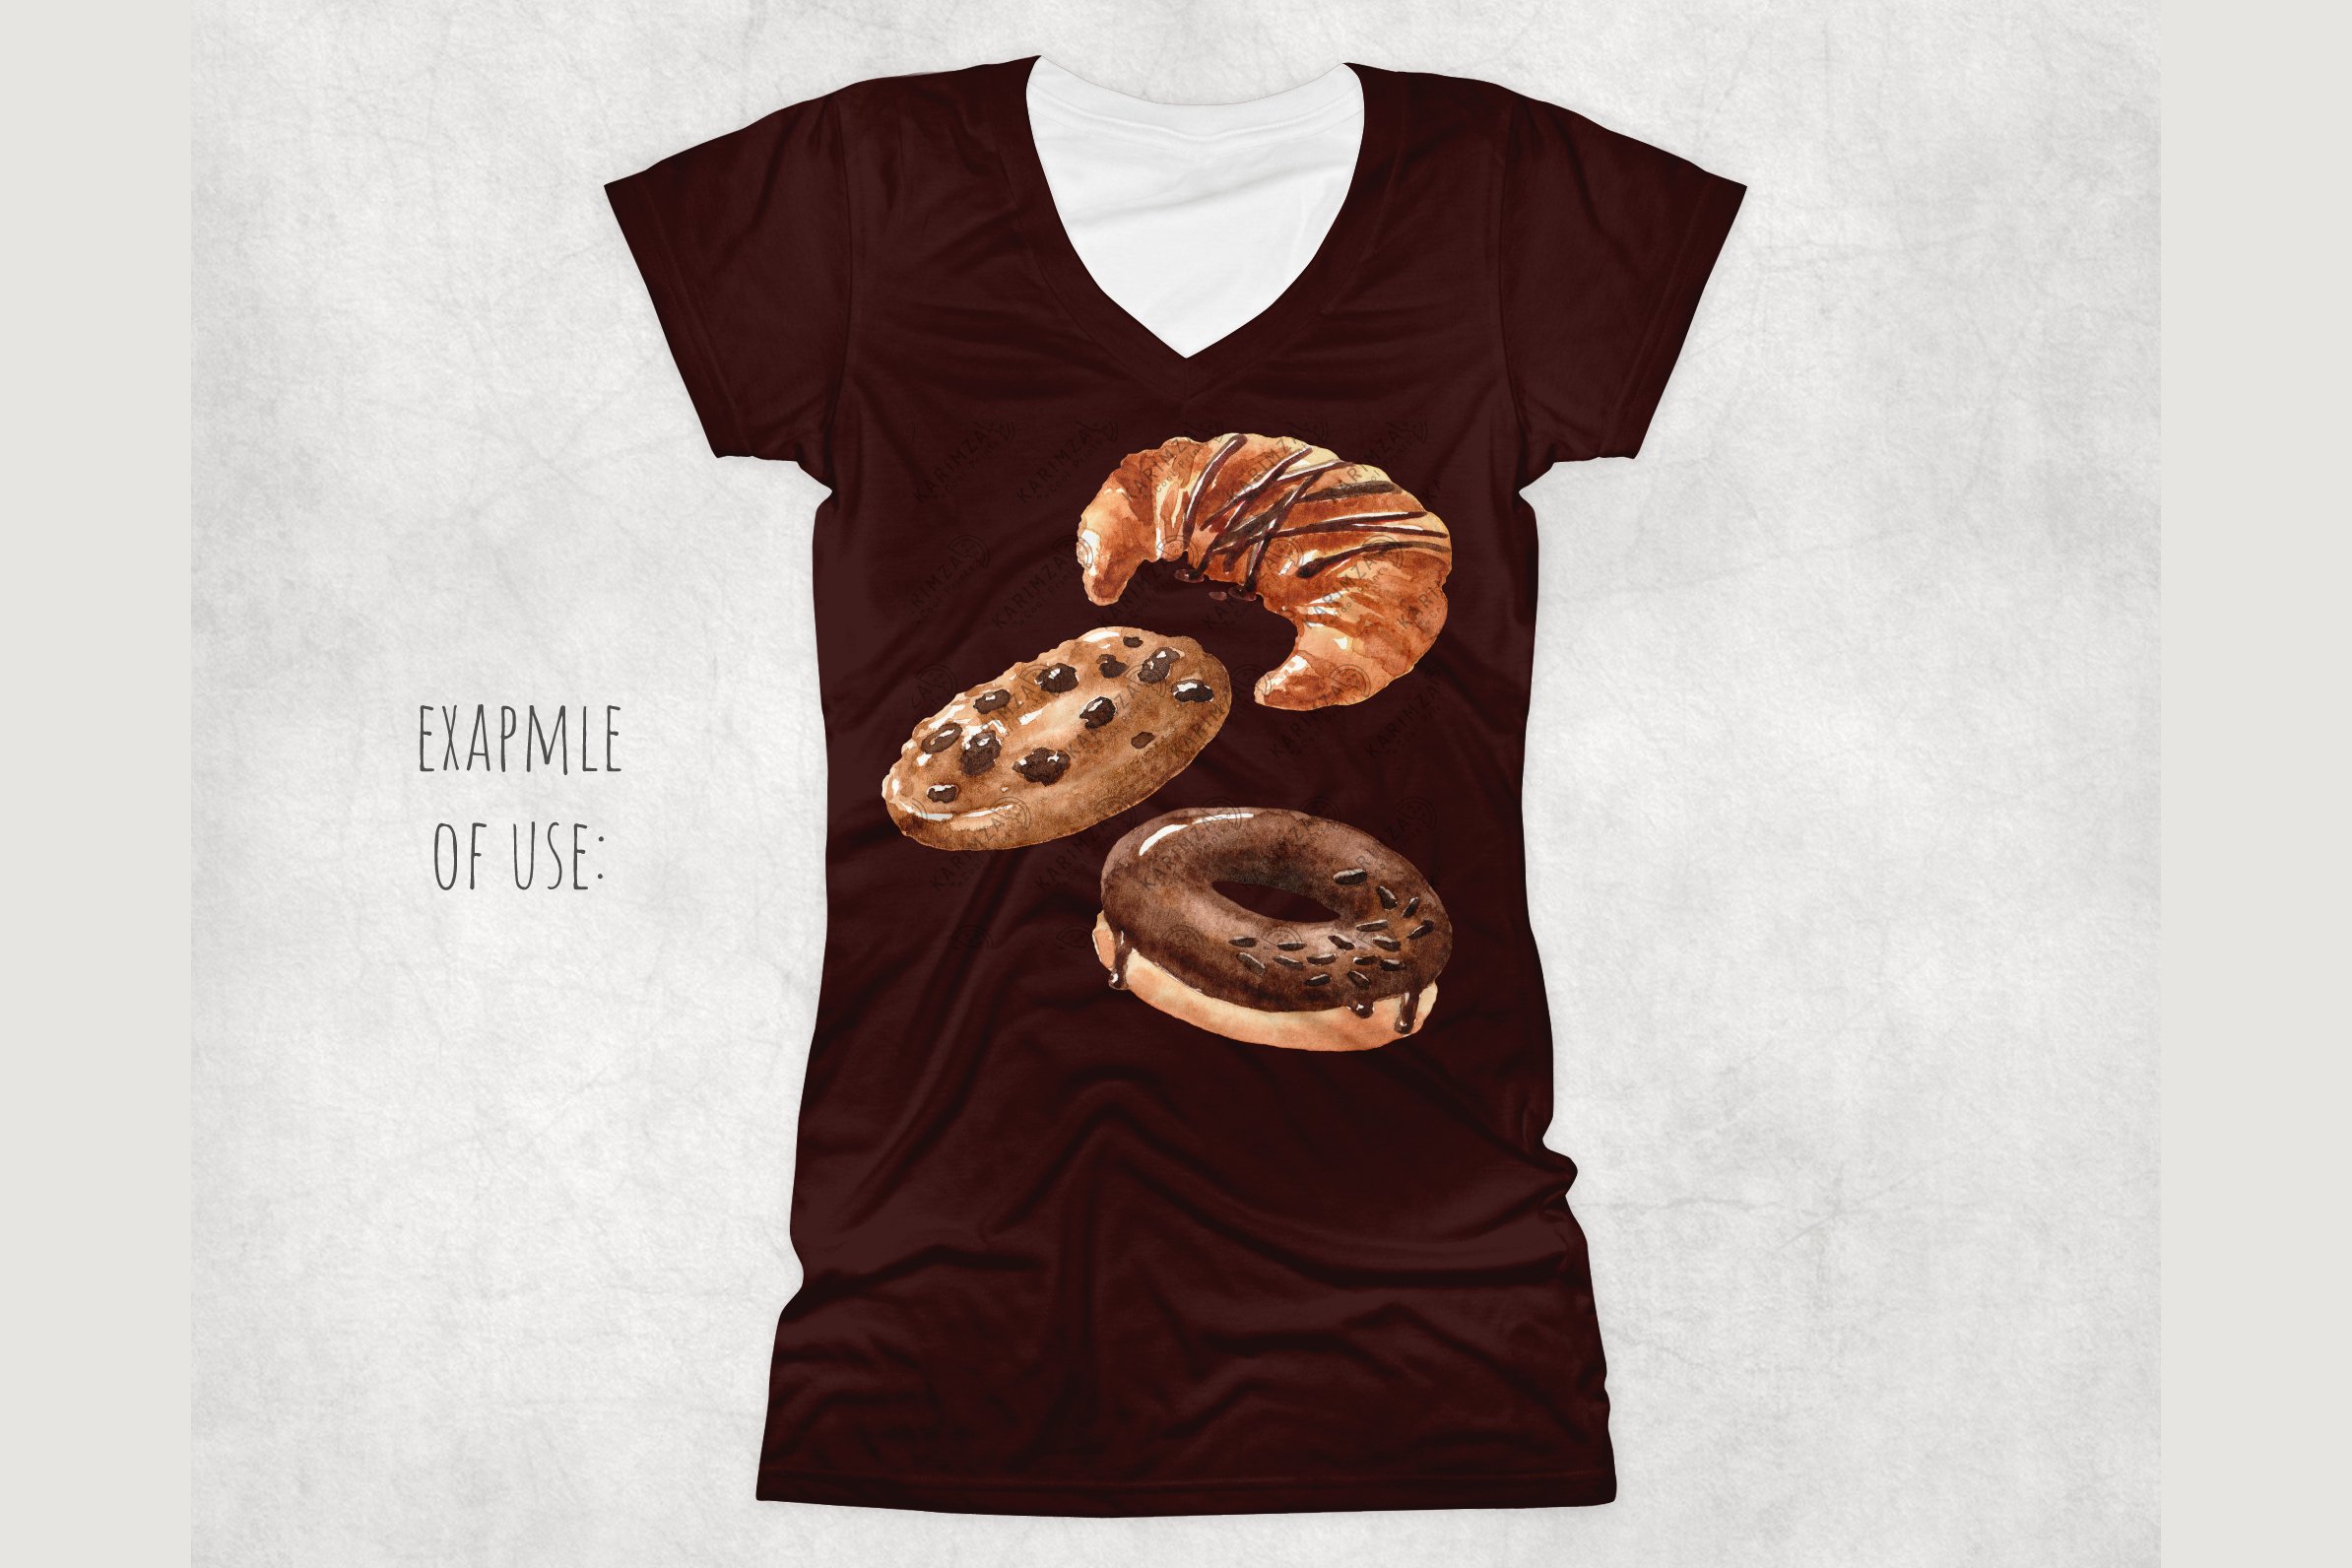 Black t-shirt with so realistic donuts.